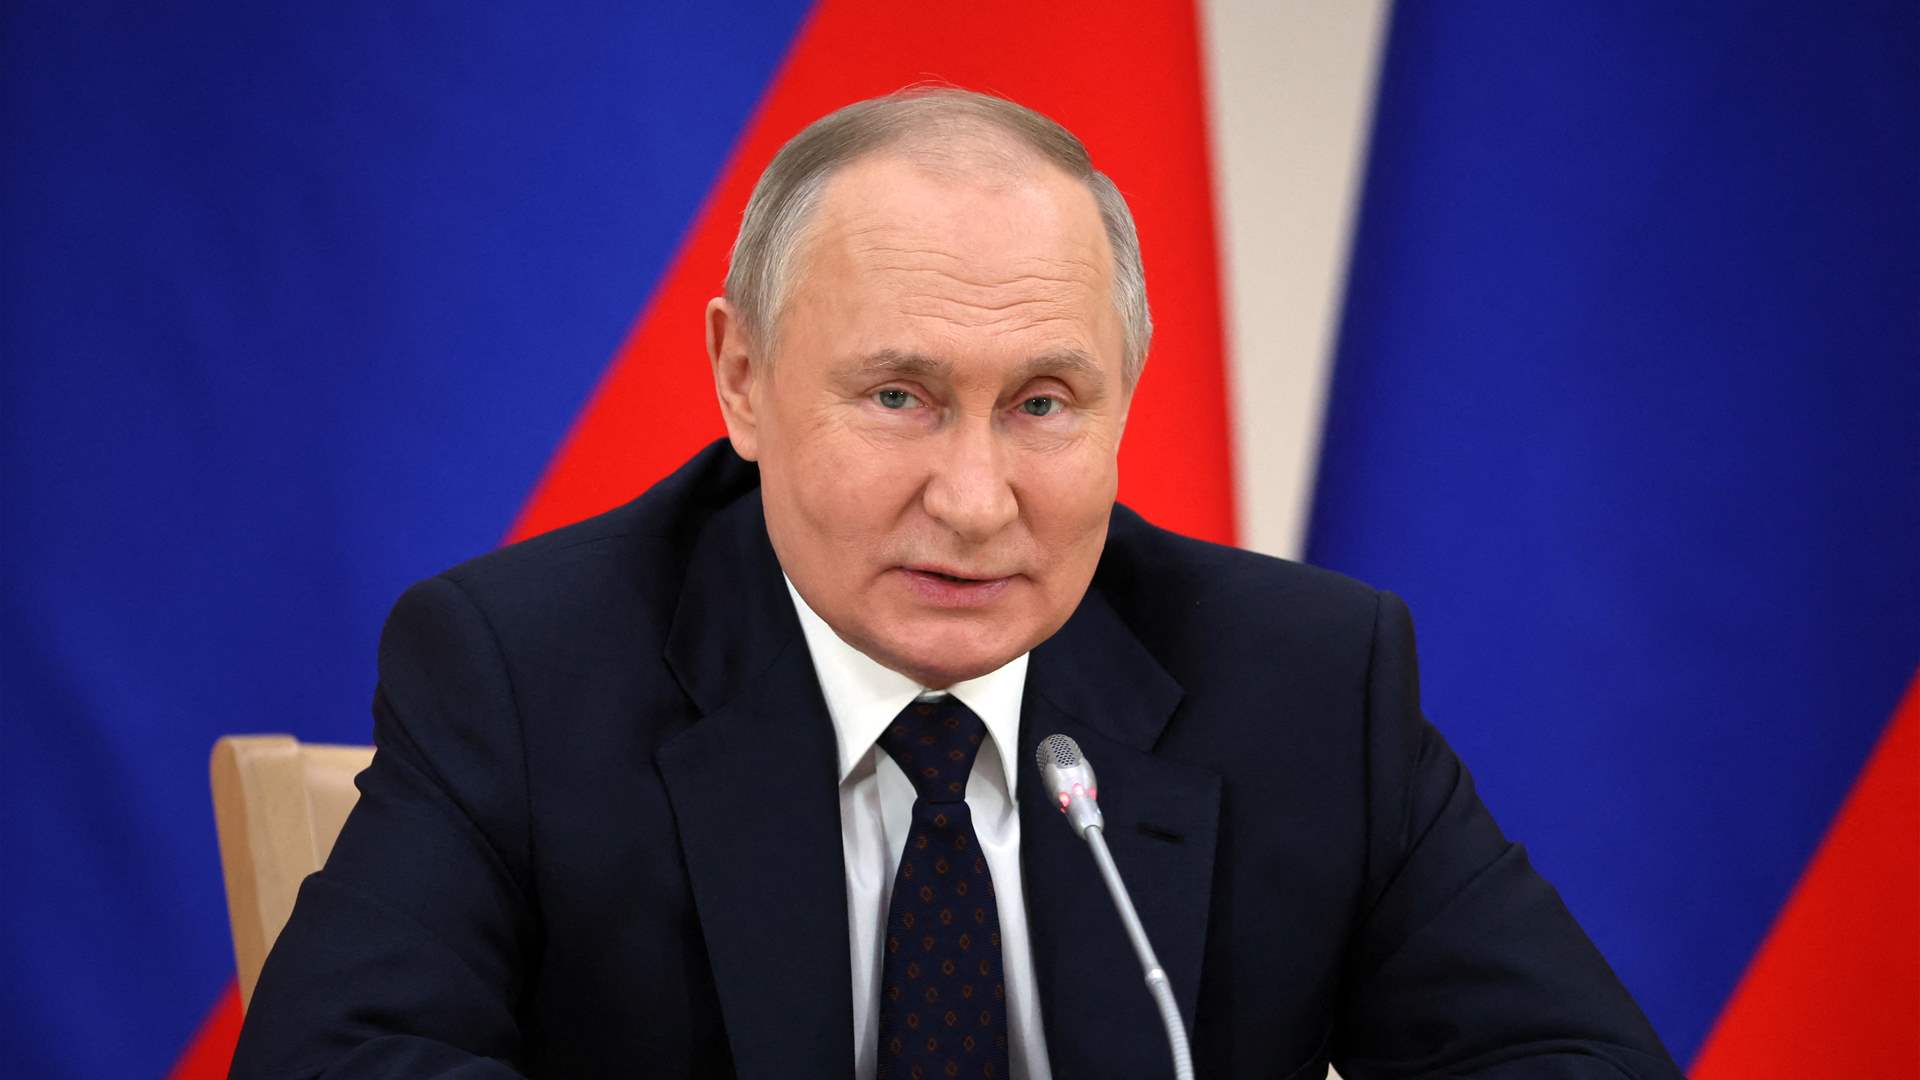 Putin considers Gaza “disaster” to be incomparable to Ukraine